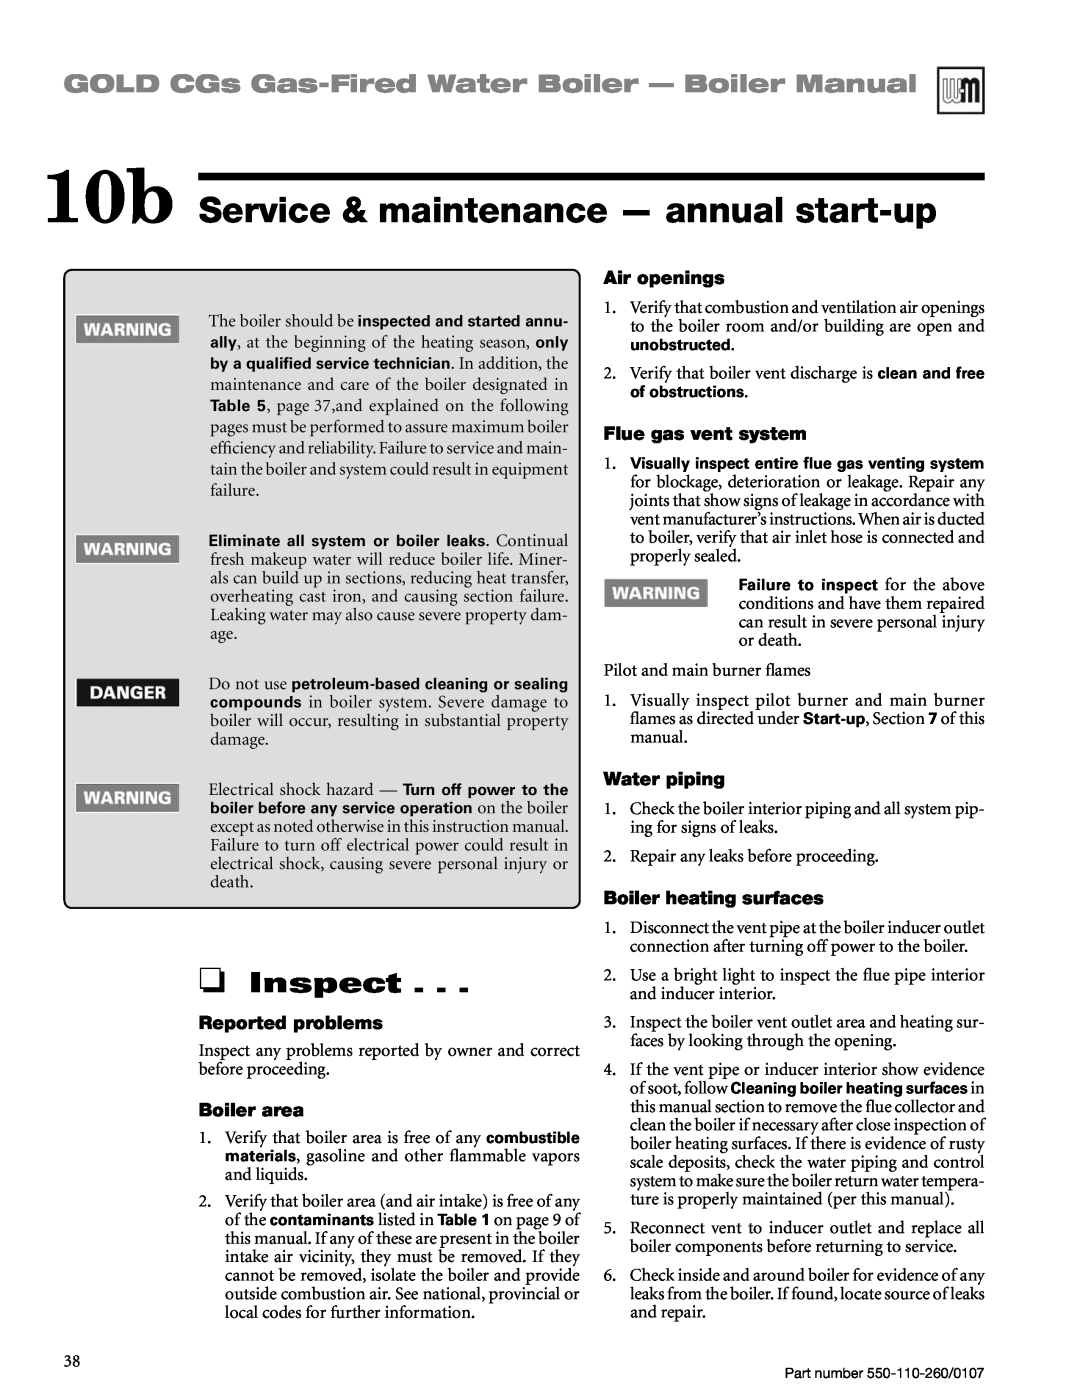 Weil-McLain 550-110-260/0107 manual 10b Service & maintenance — annual start-up, Inspect, Reported problems, Boiler area 